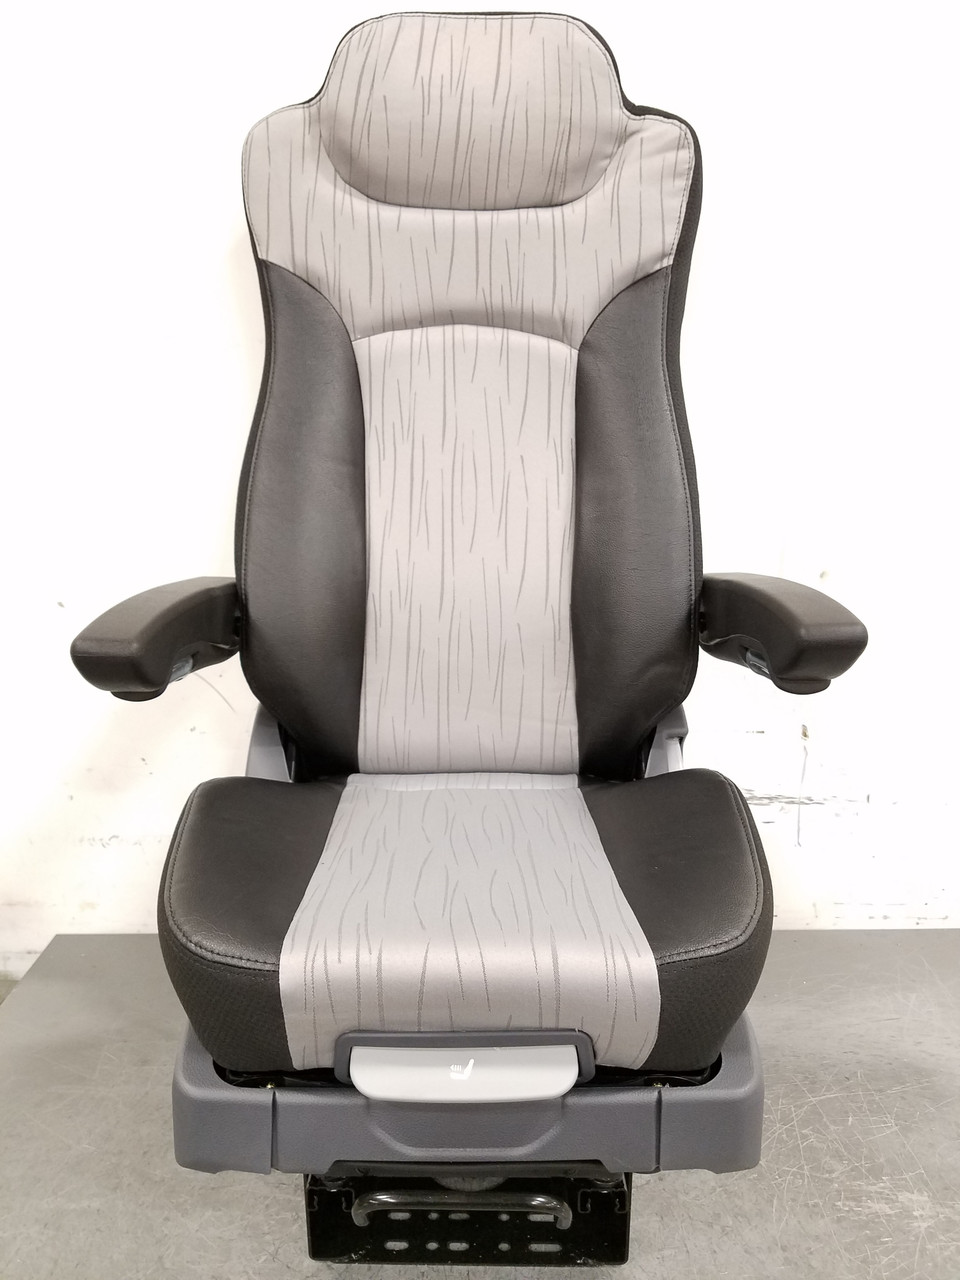 PRIME SEATING TC400C CLOTH W/ LEATHER ACCENT AIR RIDE TRUCK SEAT